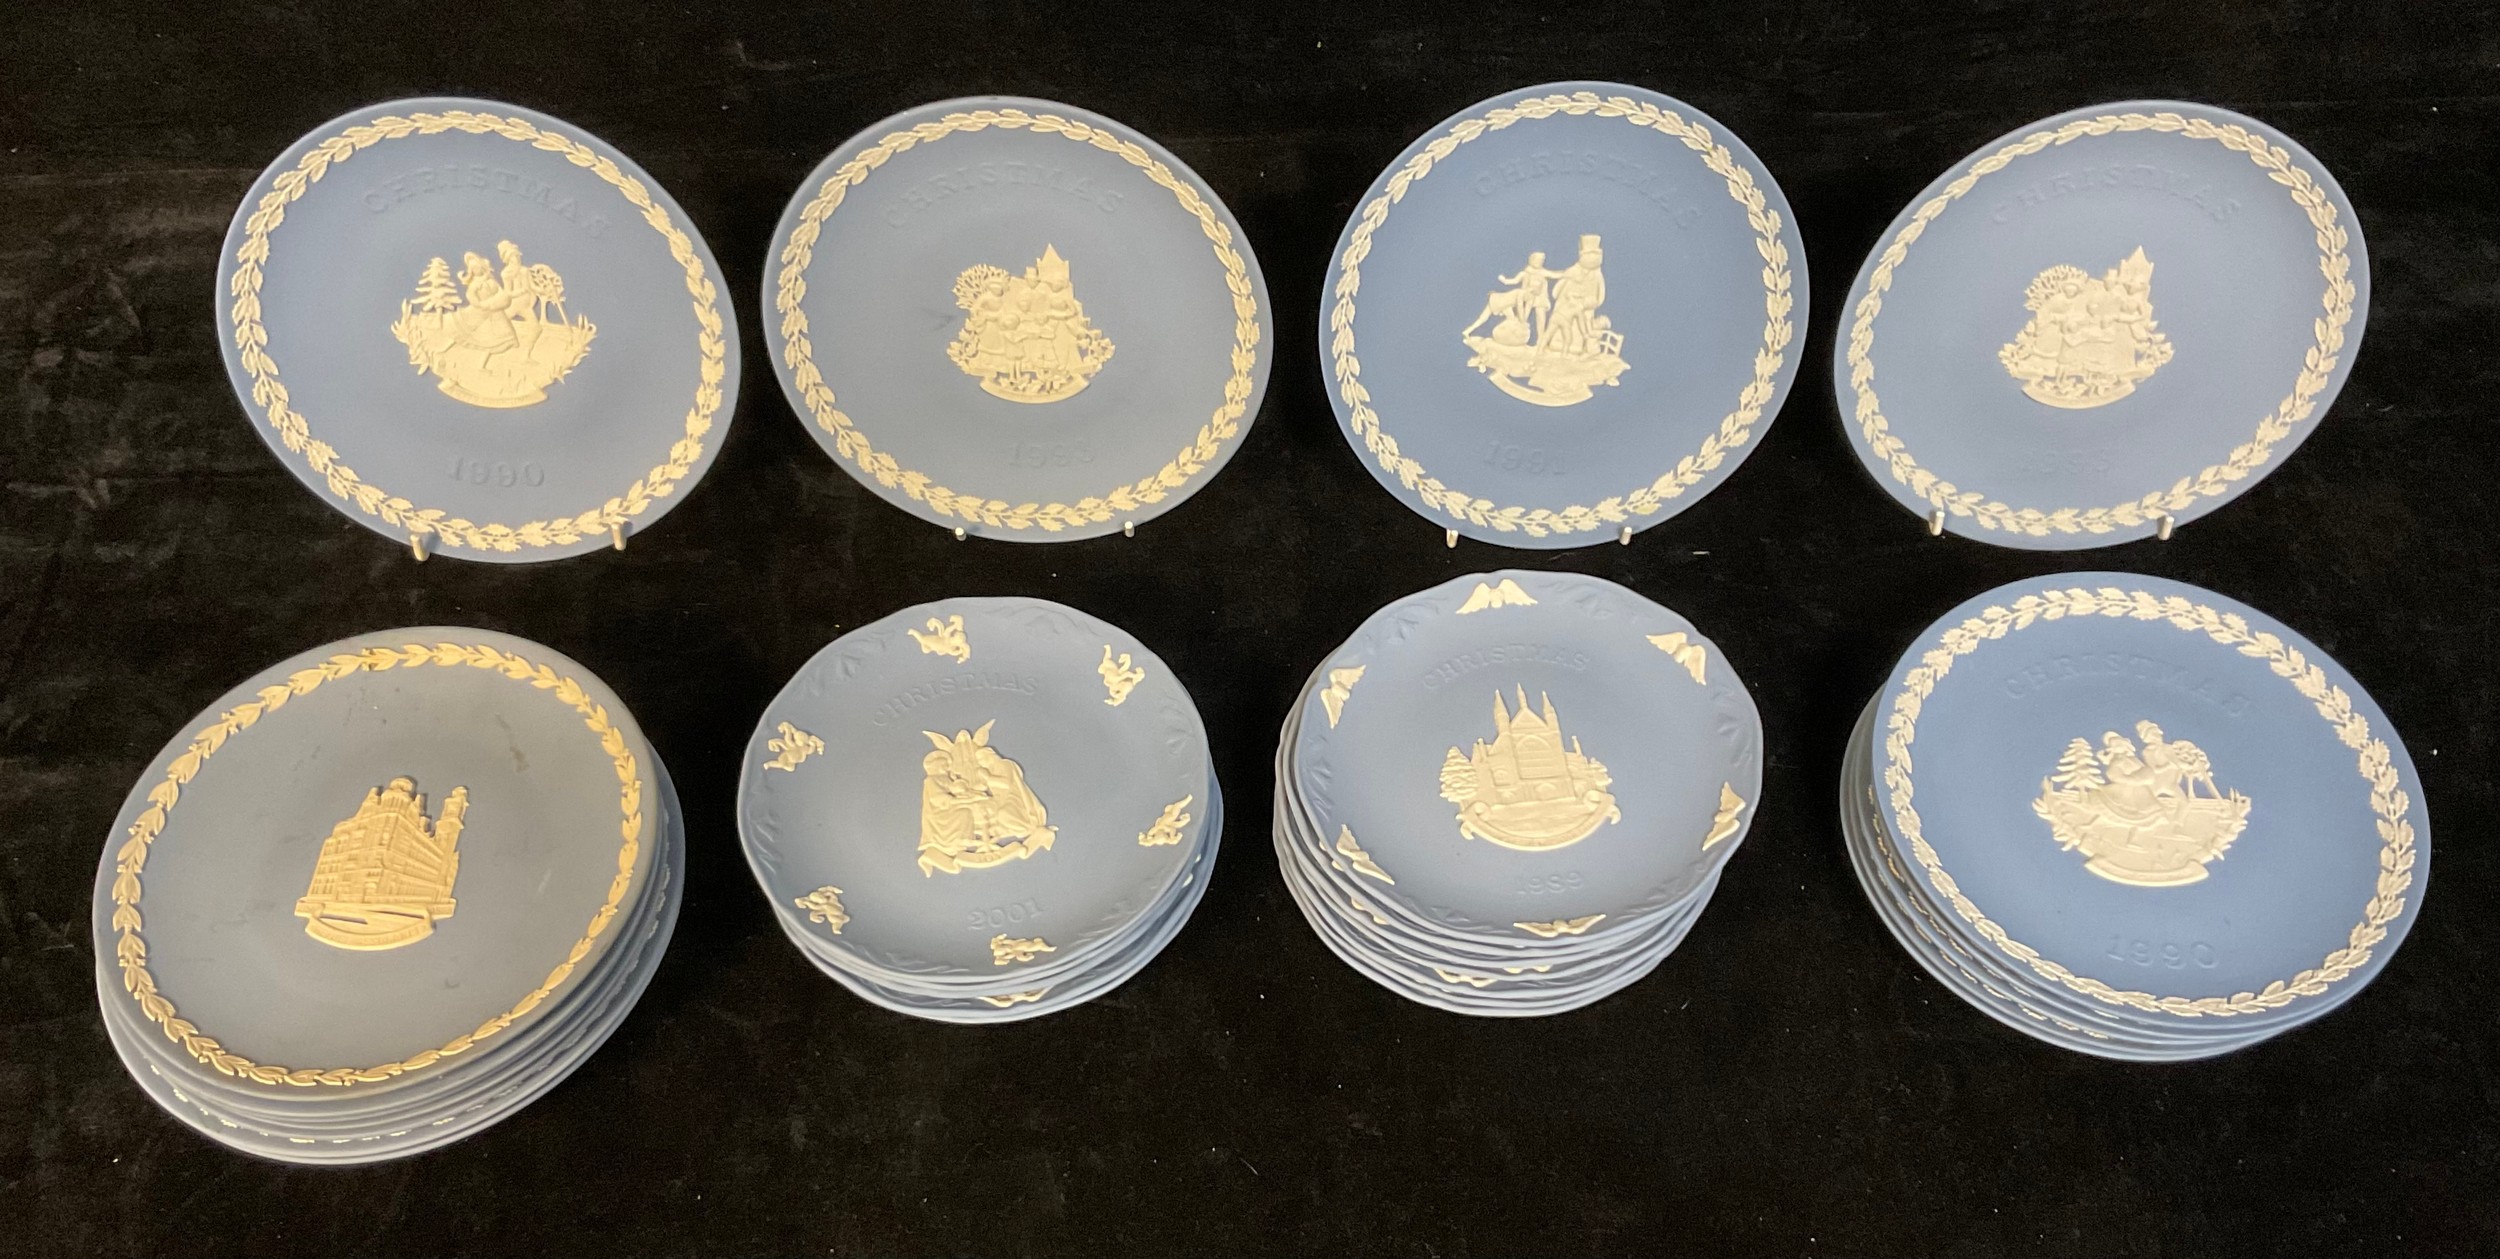 A quantity of Wedgwood Jasperware limited edition plates, including American Independence, Christmas